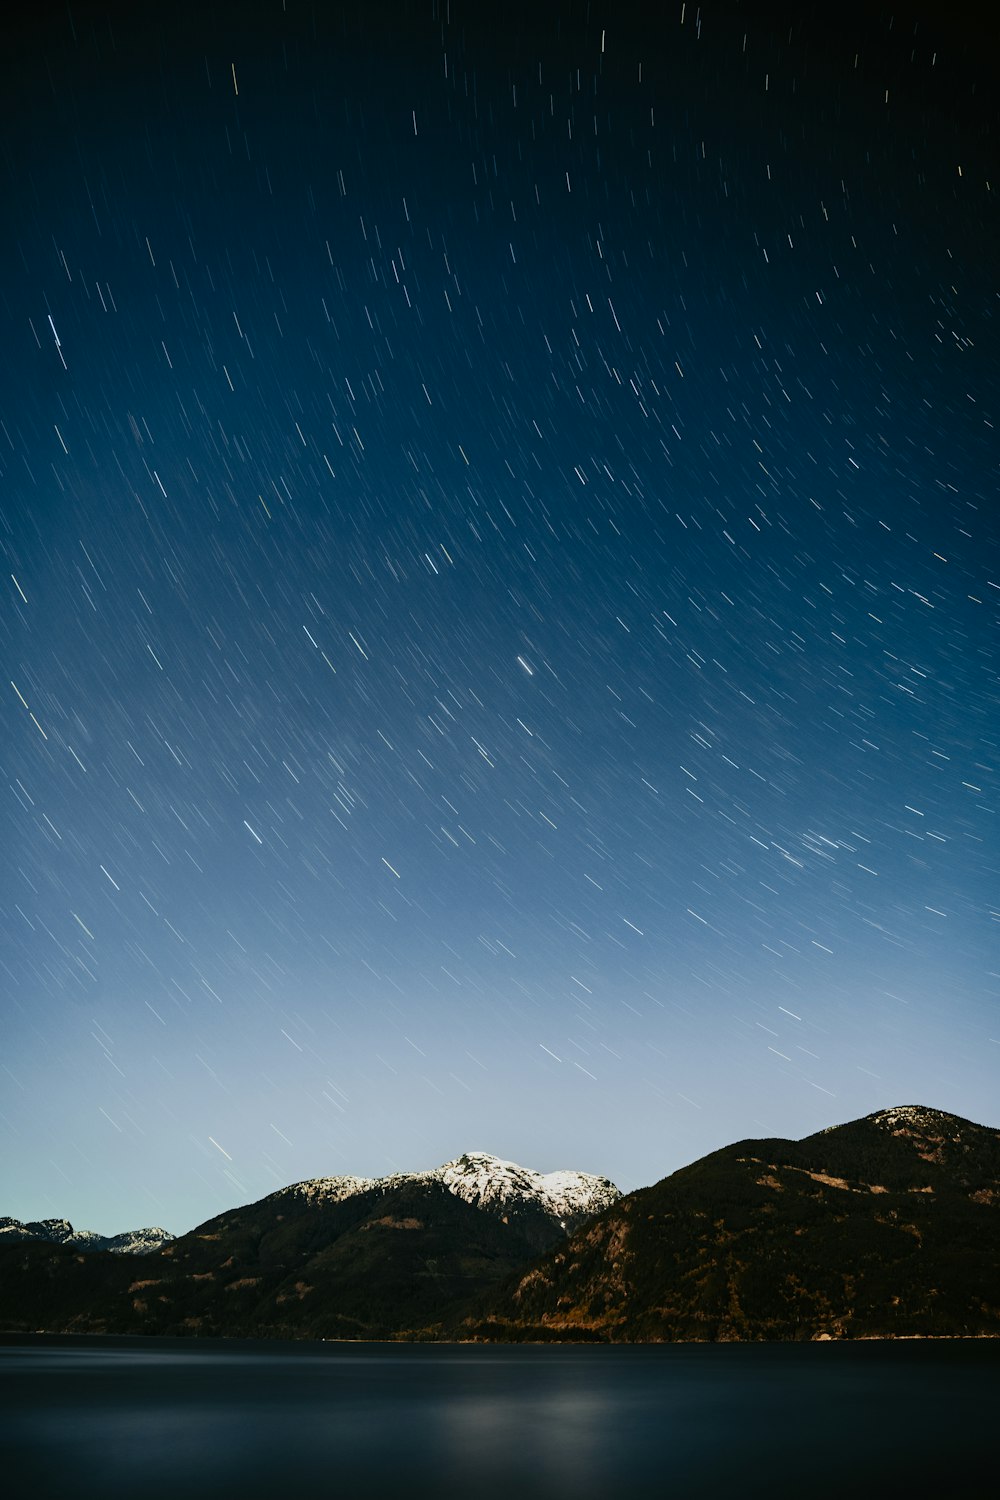 the night sky over a mountain range and a body of water